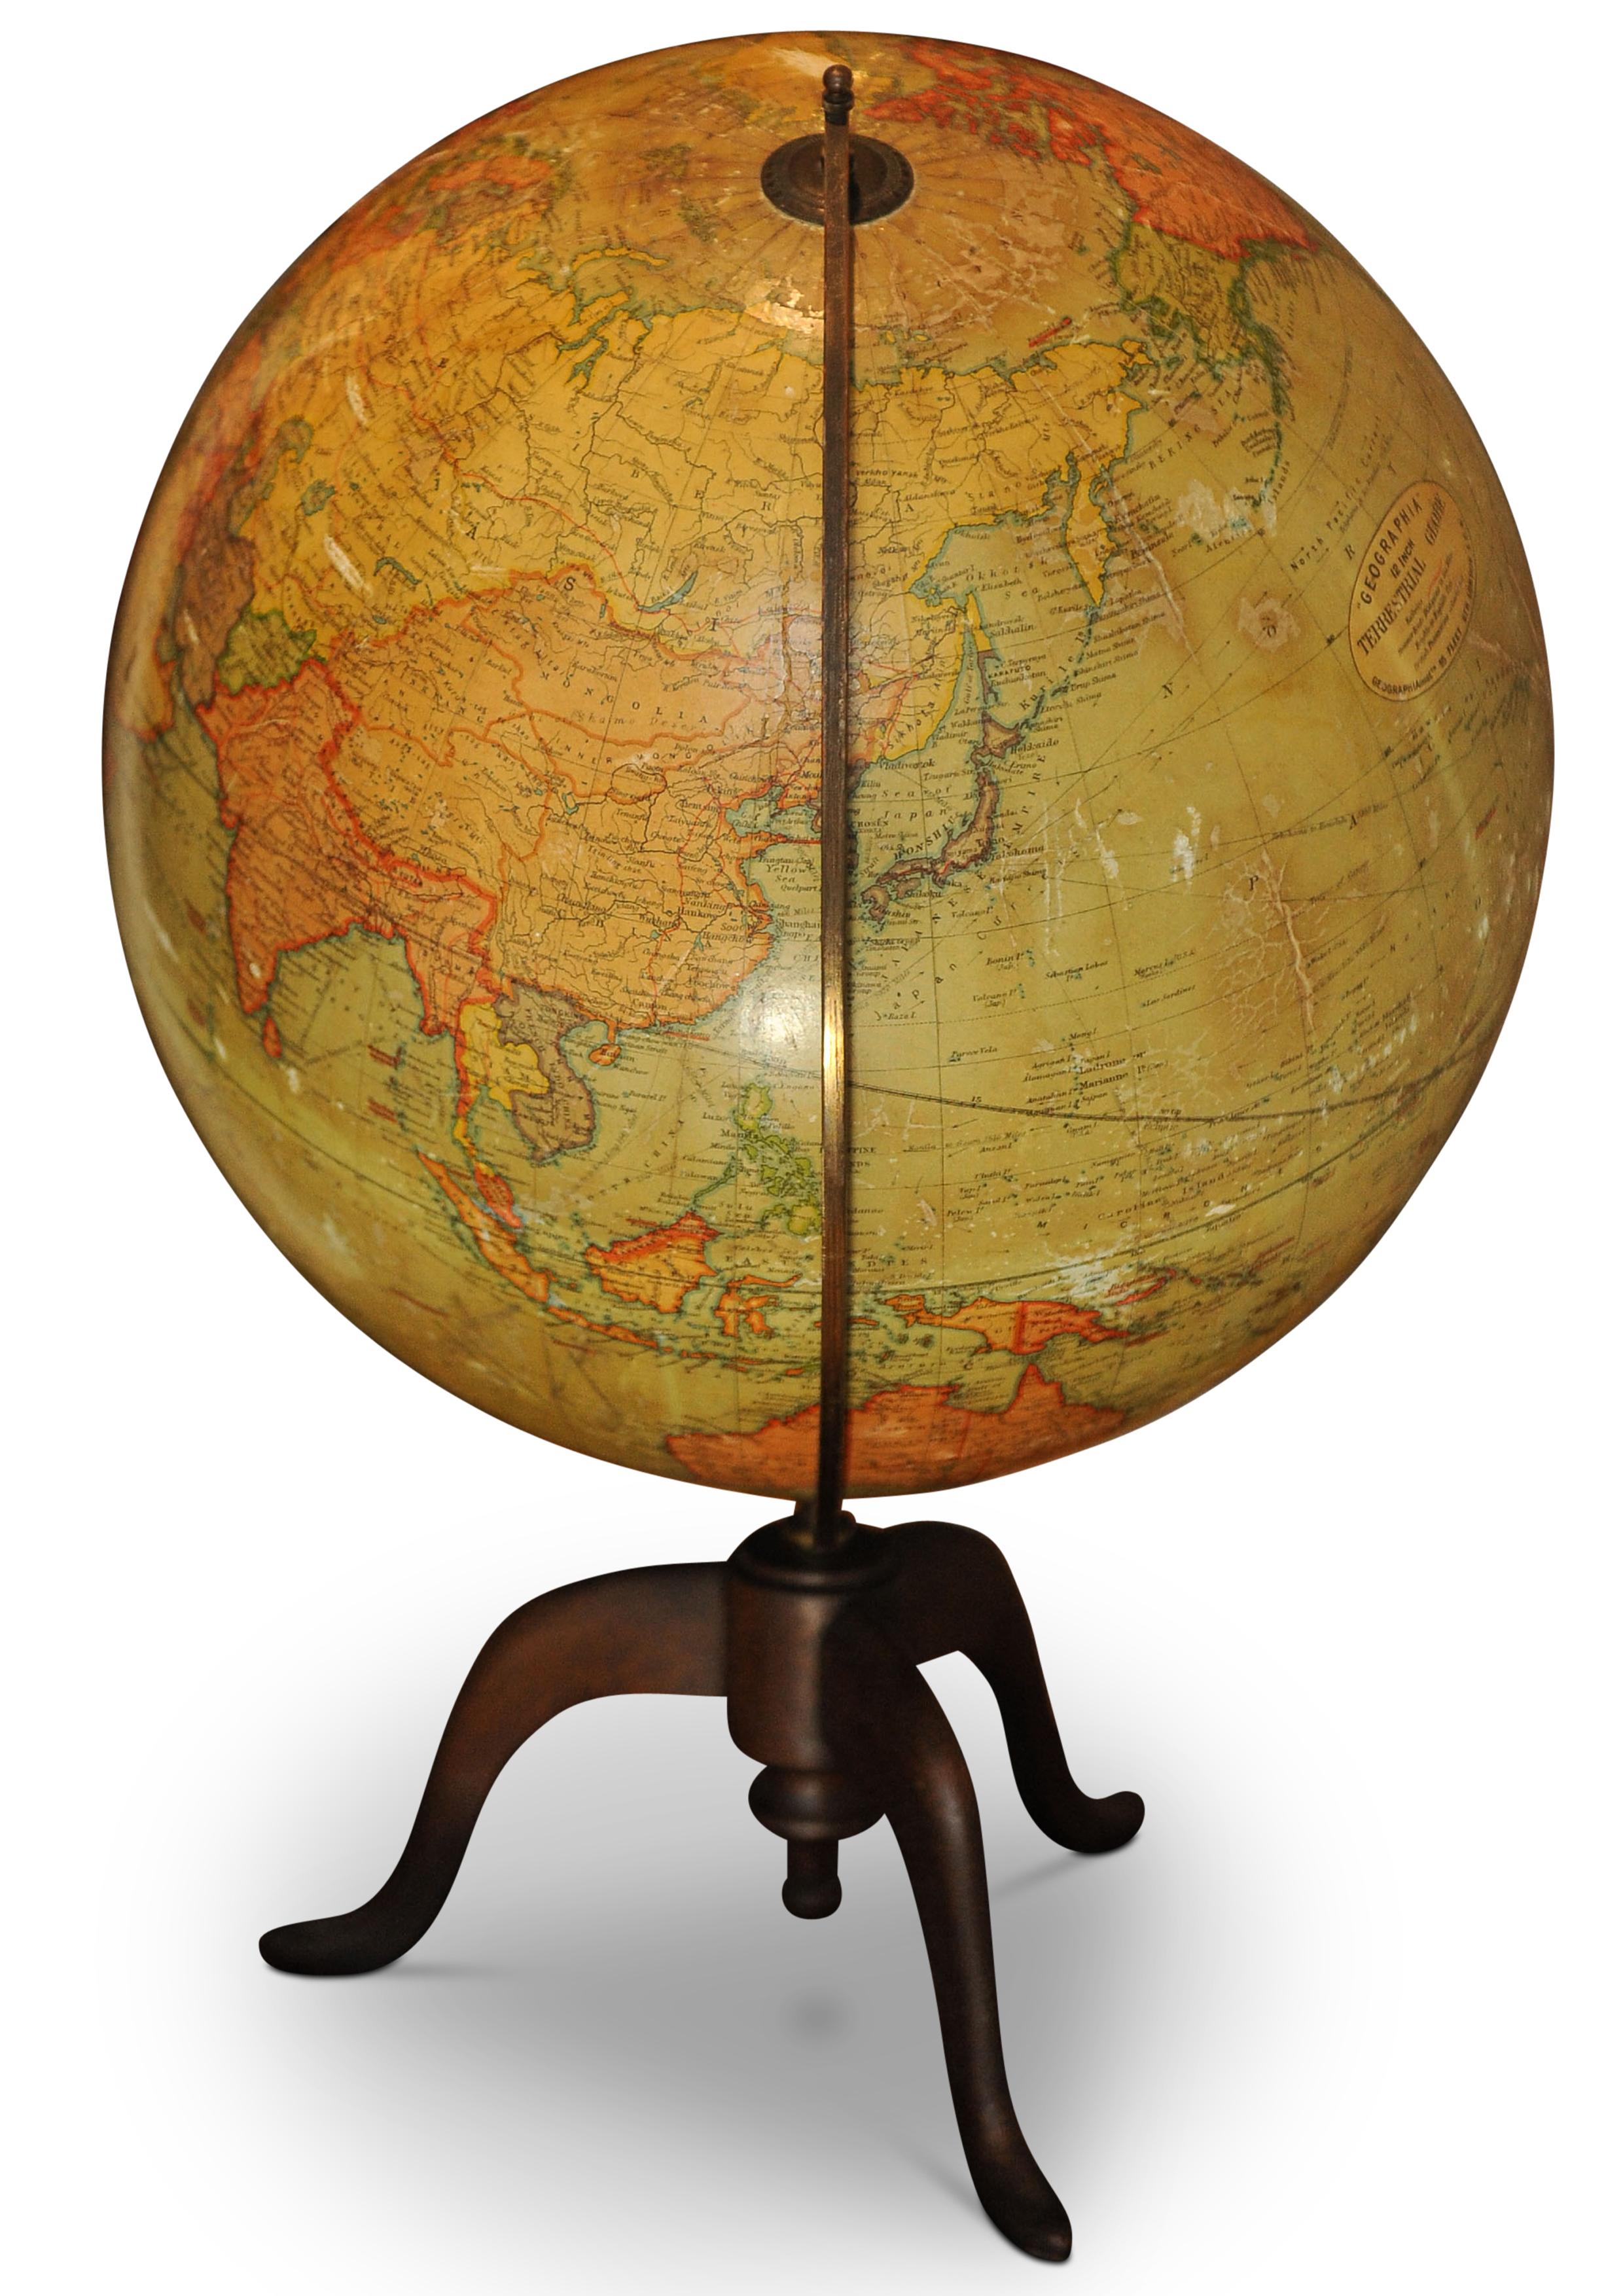 Art Deco Antique World Globe From Fleet Street London 1923 on Wooden Stand For Sale